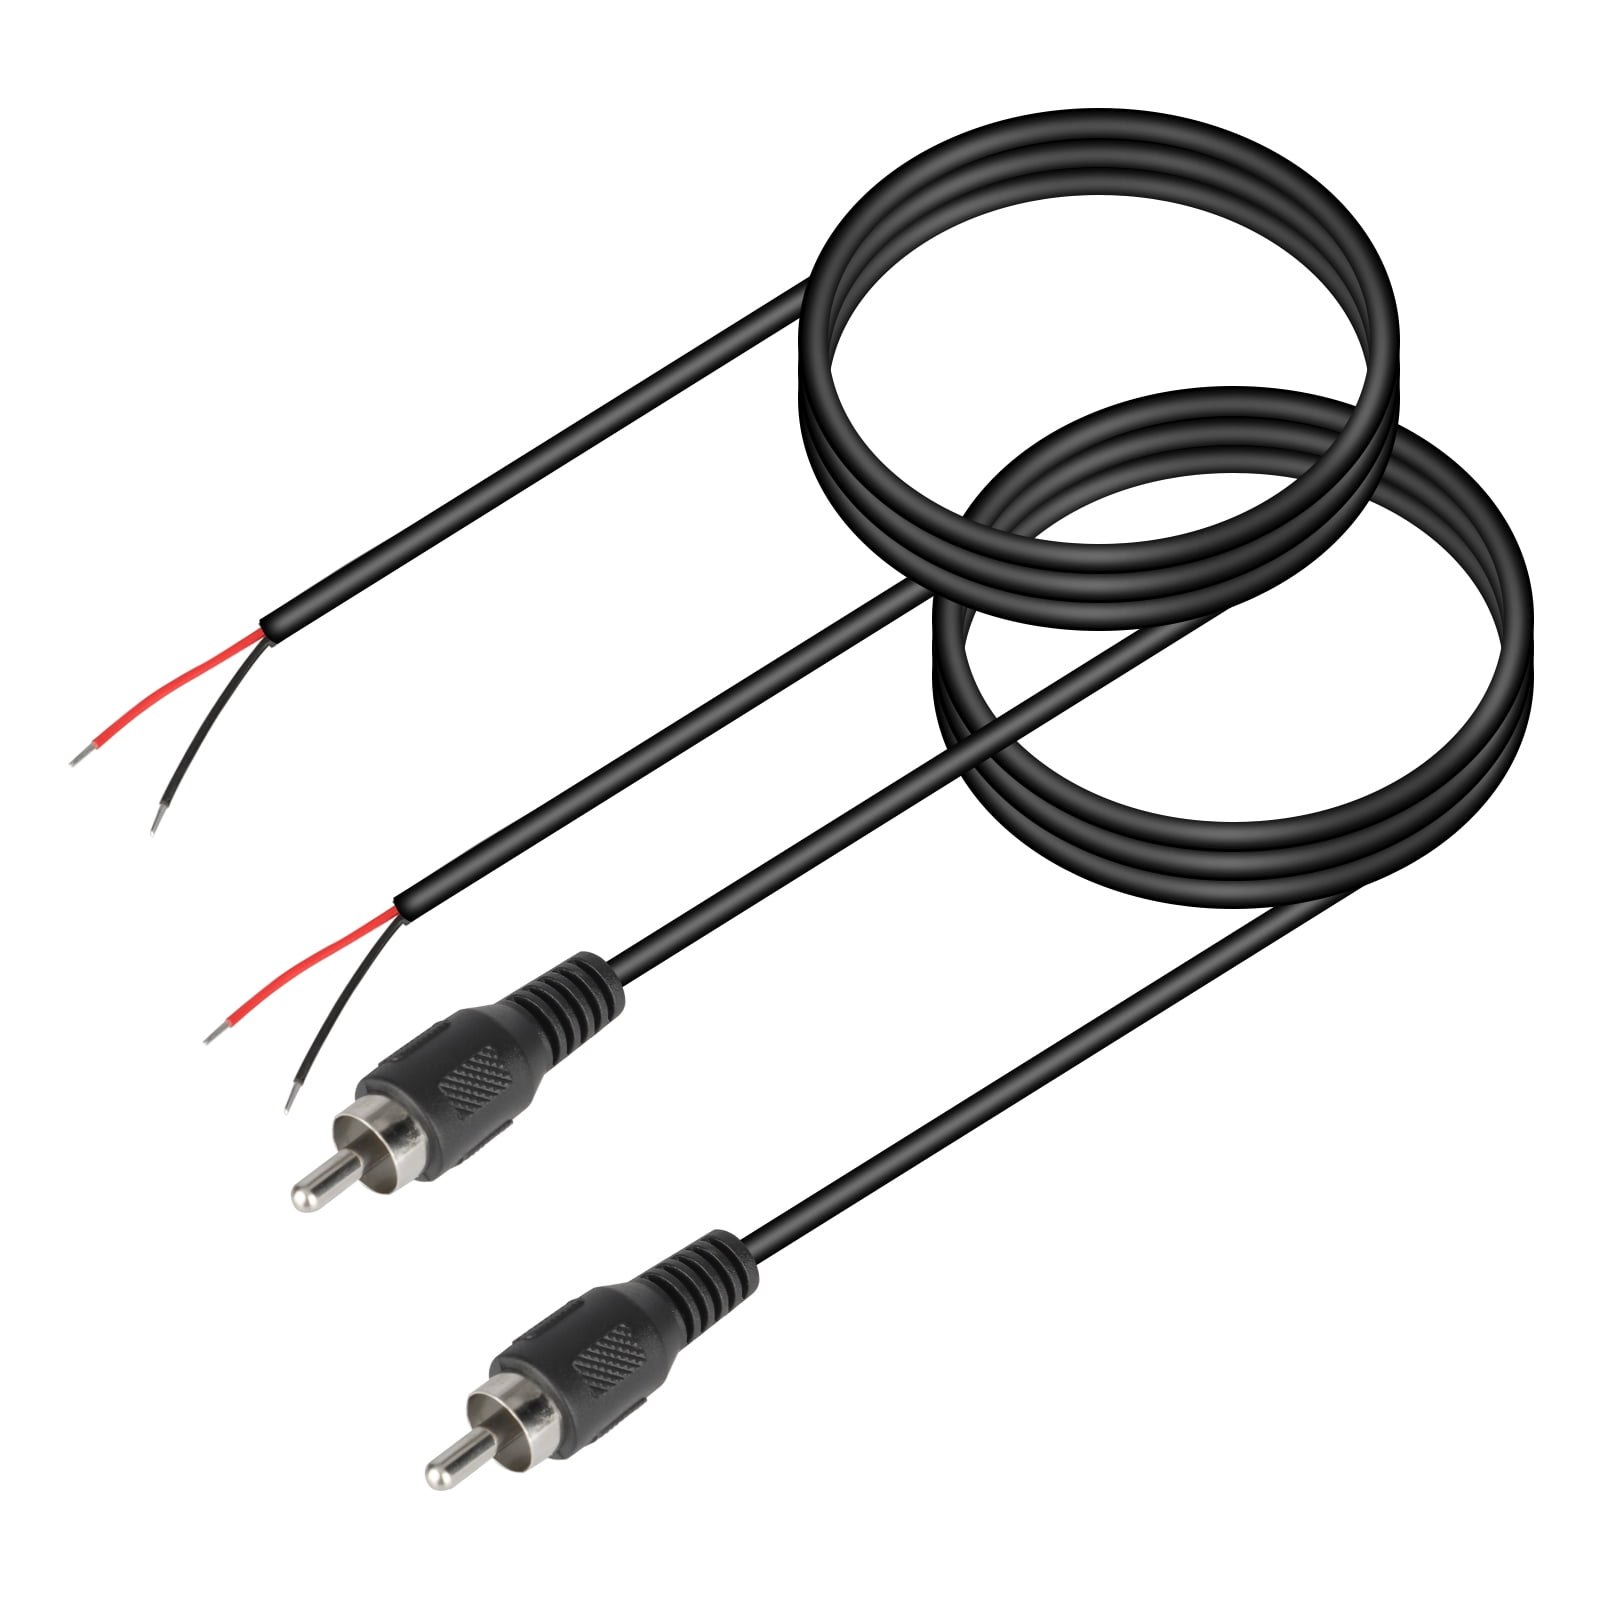 15cm Composite Video Cable 4 Pole 3.5mm Male Sraight to 3x RCA Phono Male 